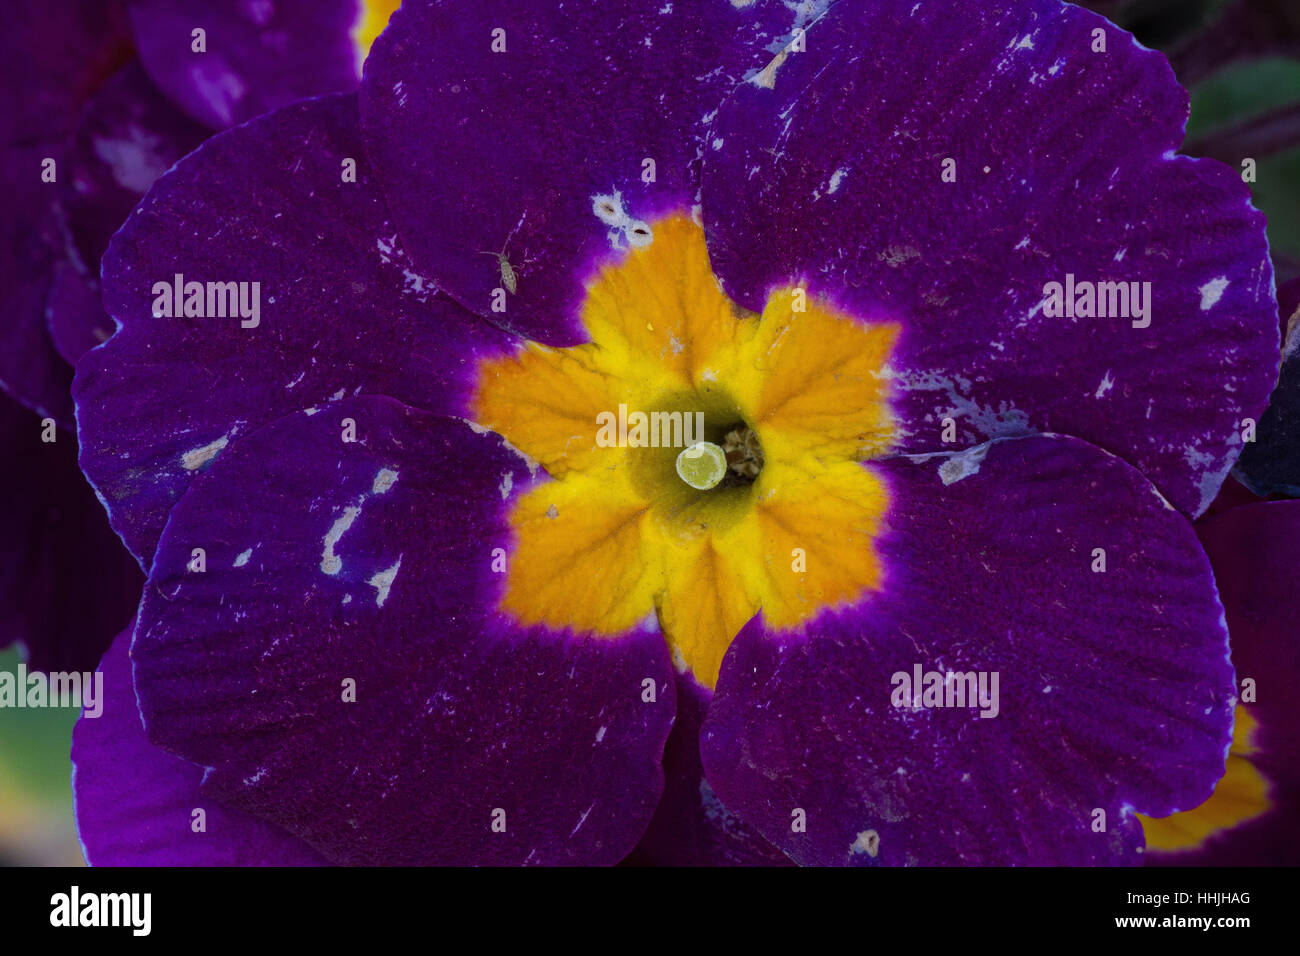 Purple flower with striped velvet textured petals and yellow centre, close-up Stock Photo